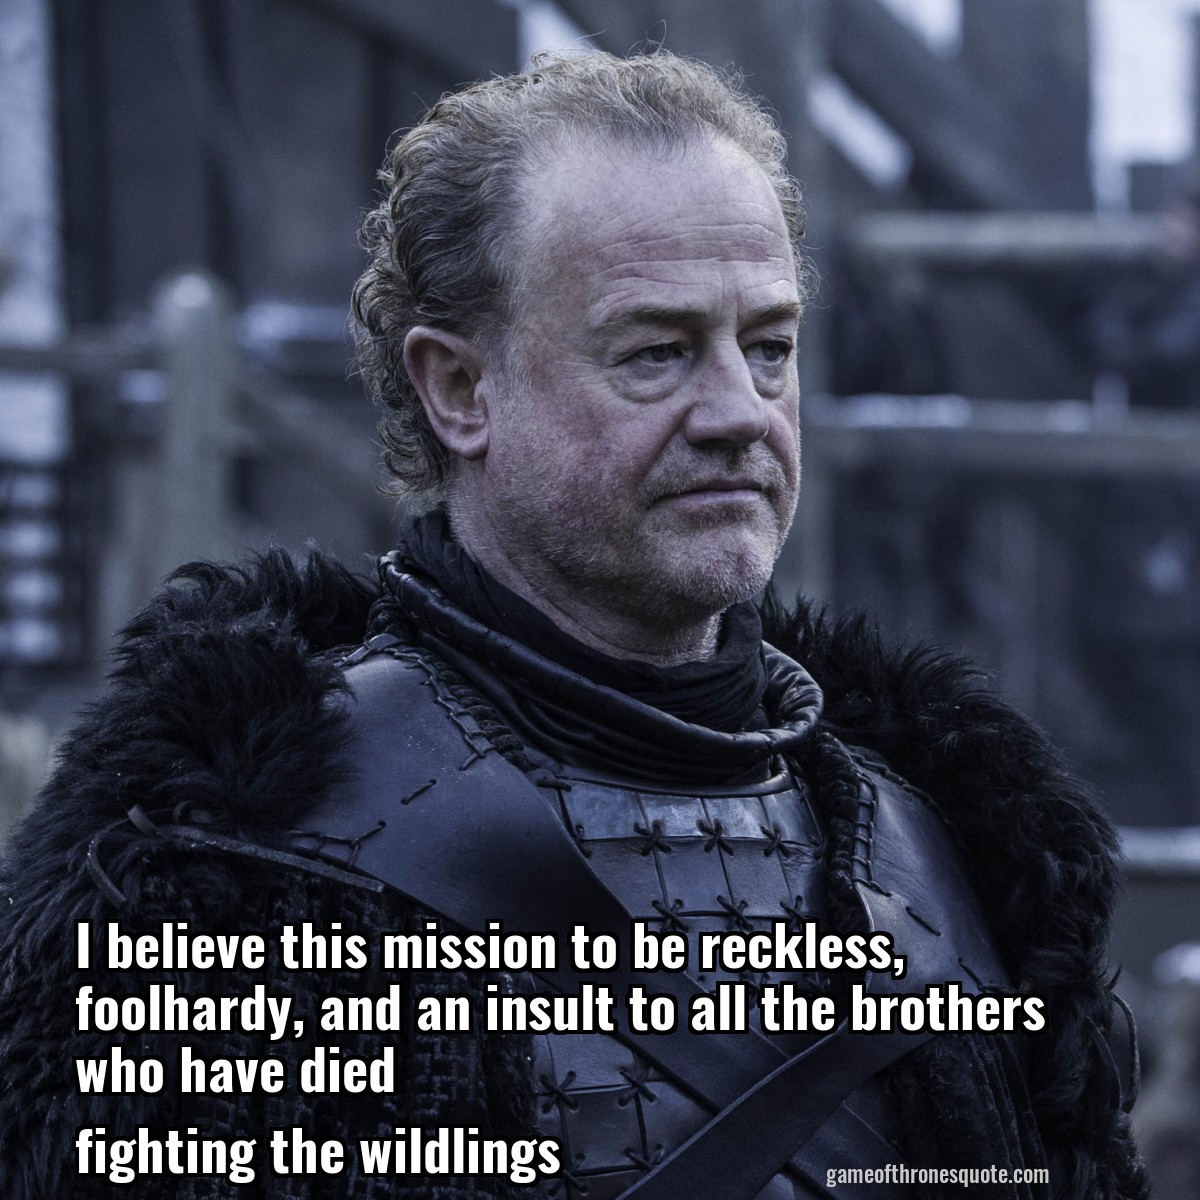 I believe this mission to be reckless, foolhardy, and an insult to all the brothers who have died
fighting the wildlings